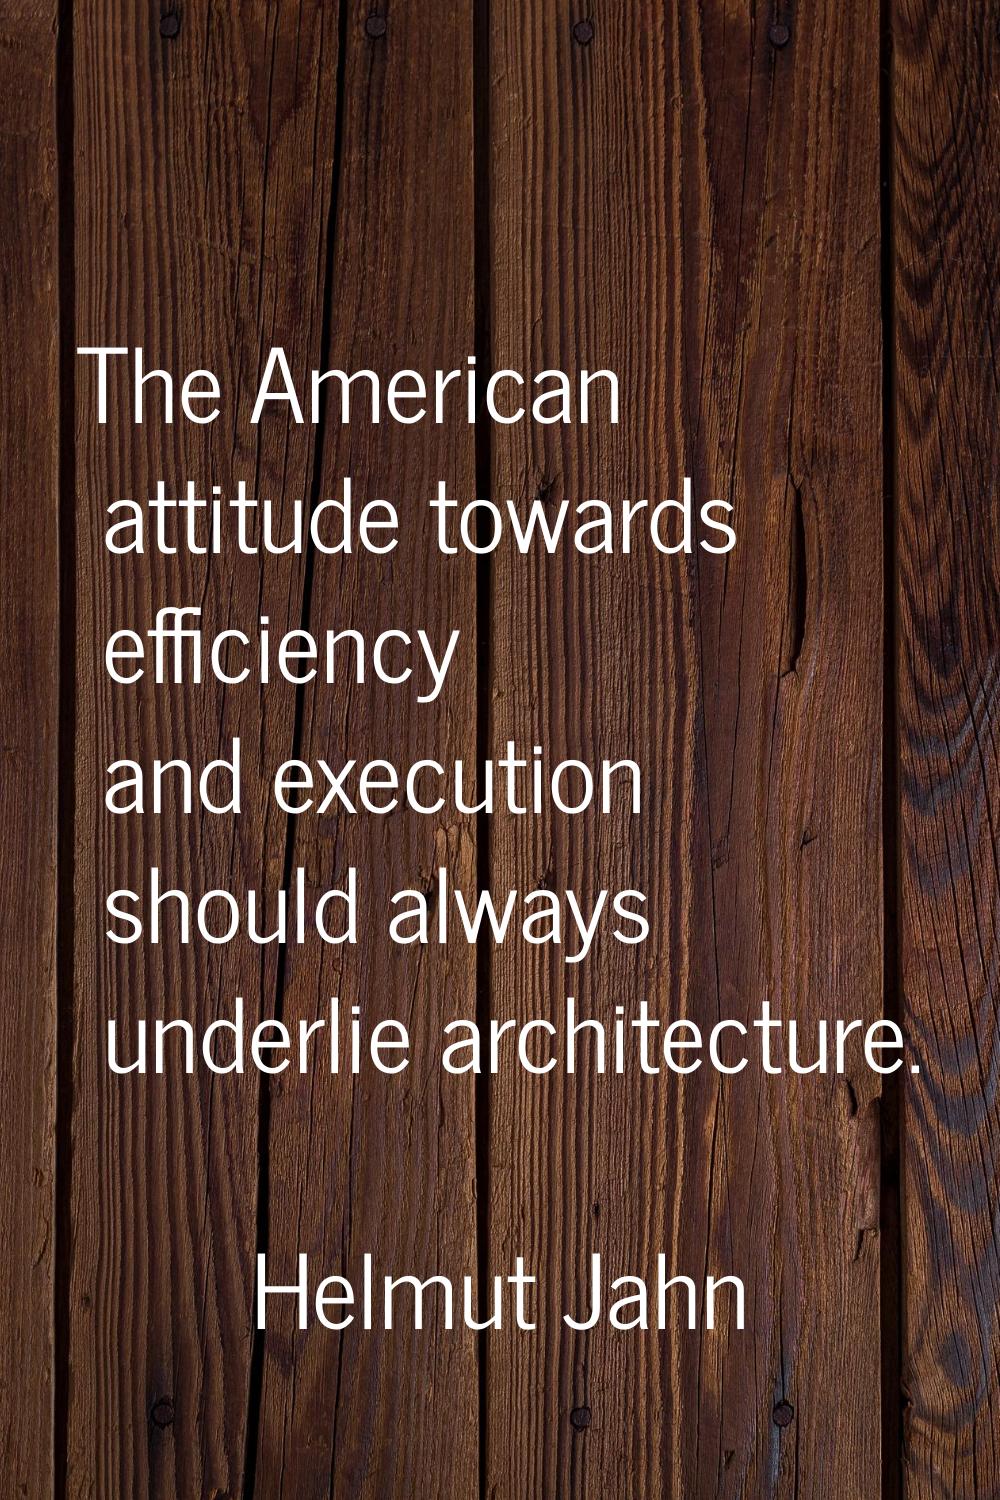 The American attitude towards efficiency and execution should always underlie architecture.